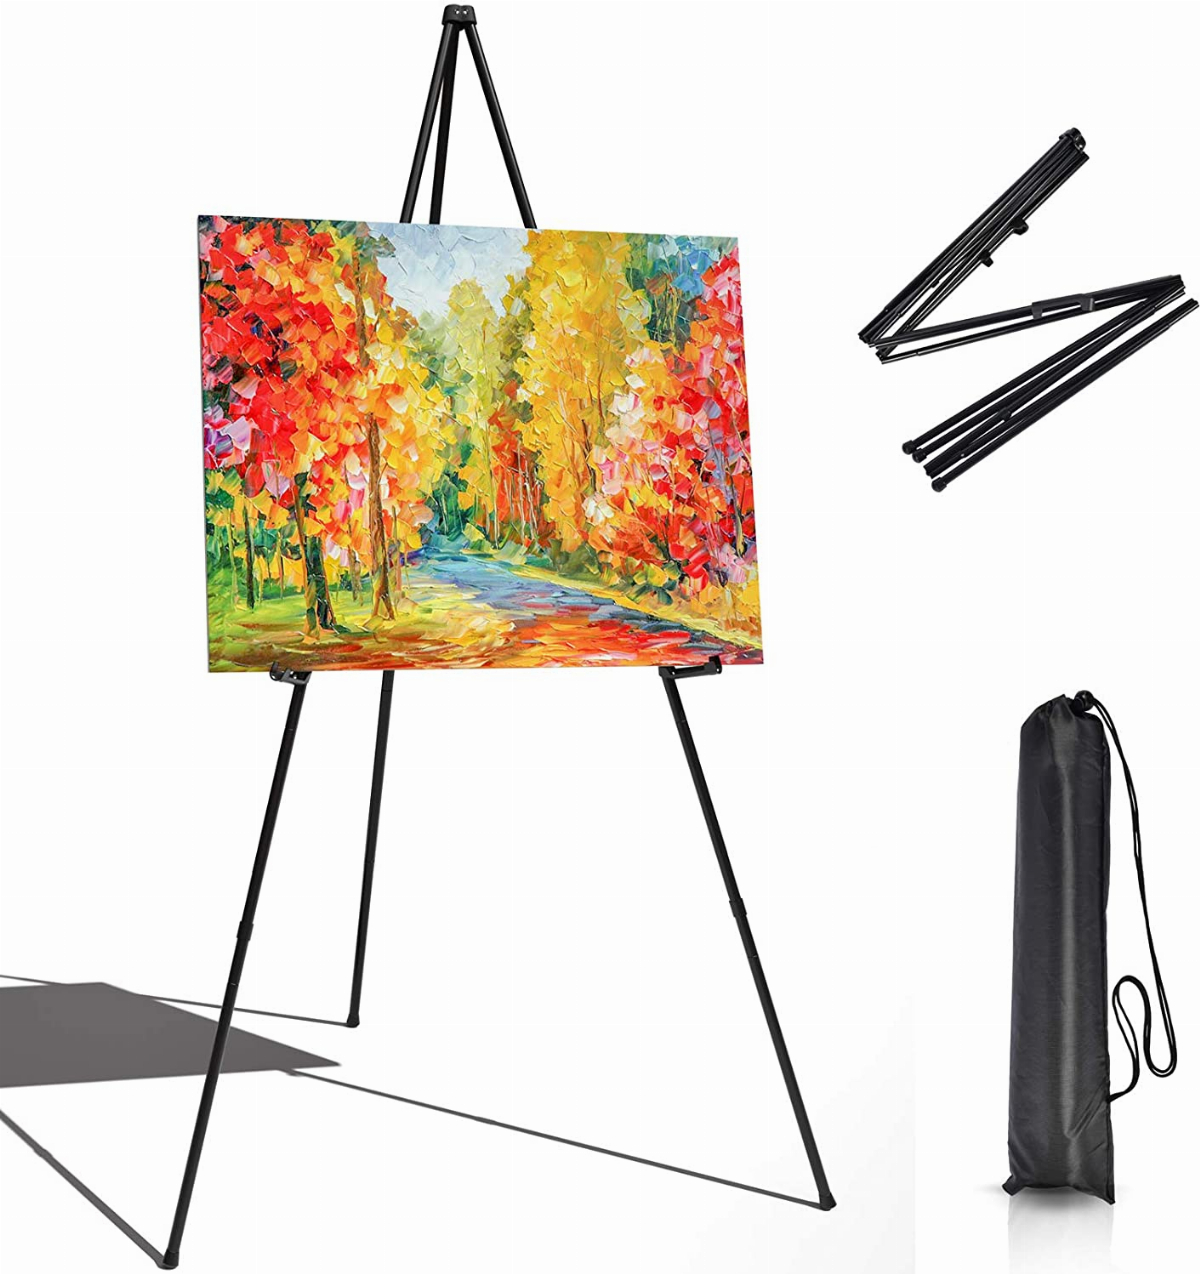 REALlWAY 63 Folding Easel Stand for Display,Adjustable Floor Poster Easel for Arts,Pictures,Paintings,Telescoping Black Metal Easel Fit for Signs at Exhibition,Lobby,Holds 5lbs,1Pack 